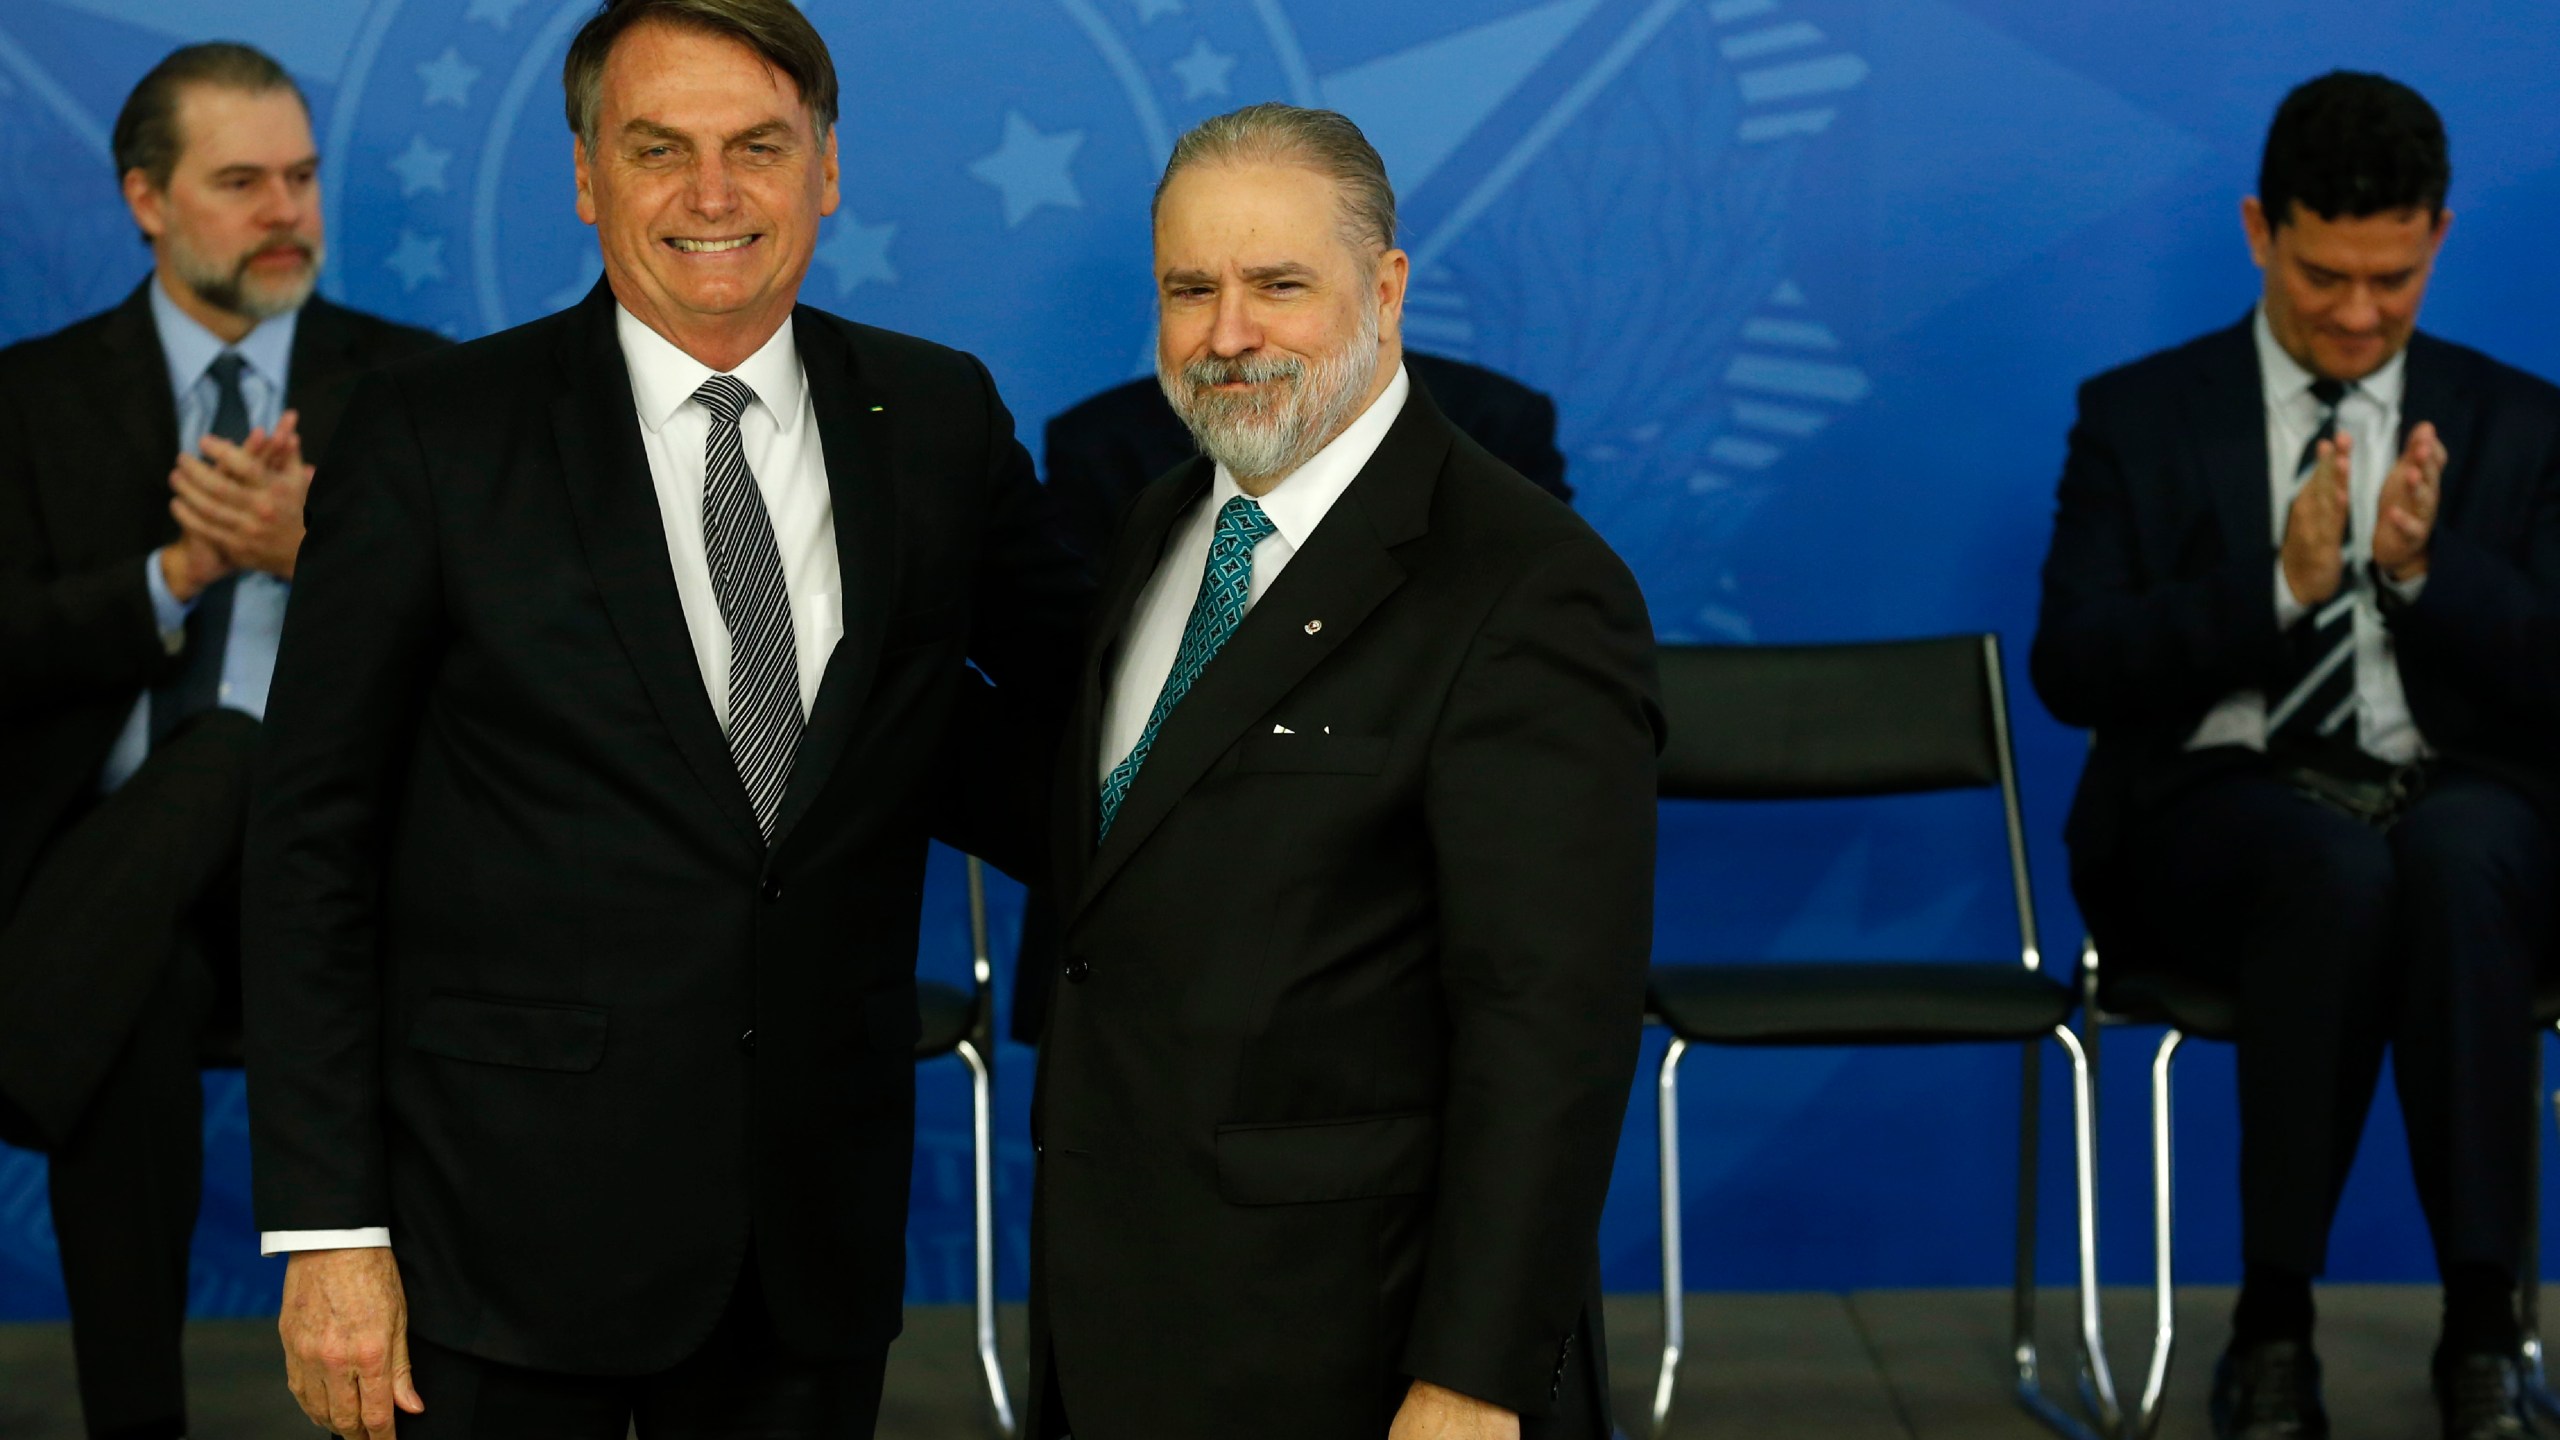 FILE - Brazil's President Jair Bolsonaro poses for a photo with his newly appointed attorney general, Augusto Aras, at the Planalto Presidential Palace, in Brasilia, Brazil, Sept. 26, 2019. A Federal Police indictment unveiled Tuesday, March 19, 2024, has shed new light on a Senate committee inquiry that ended in October 2021 with a recommendation for nine criminal charges against Bolsonaro, alleging that he mismanaged the pandemic. Aras declined to move the case forward. (AP Photo/Eraldo Peres, File)